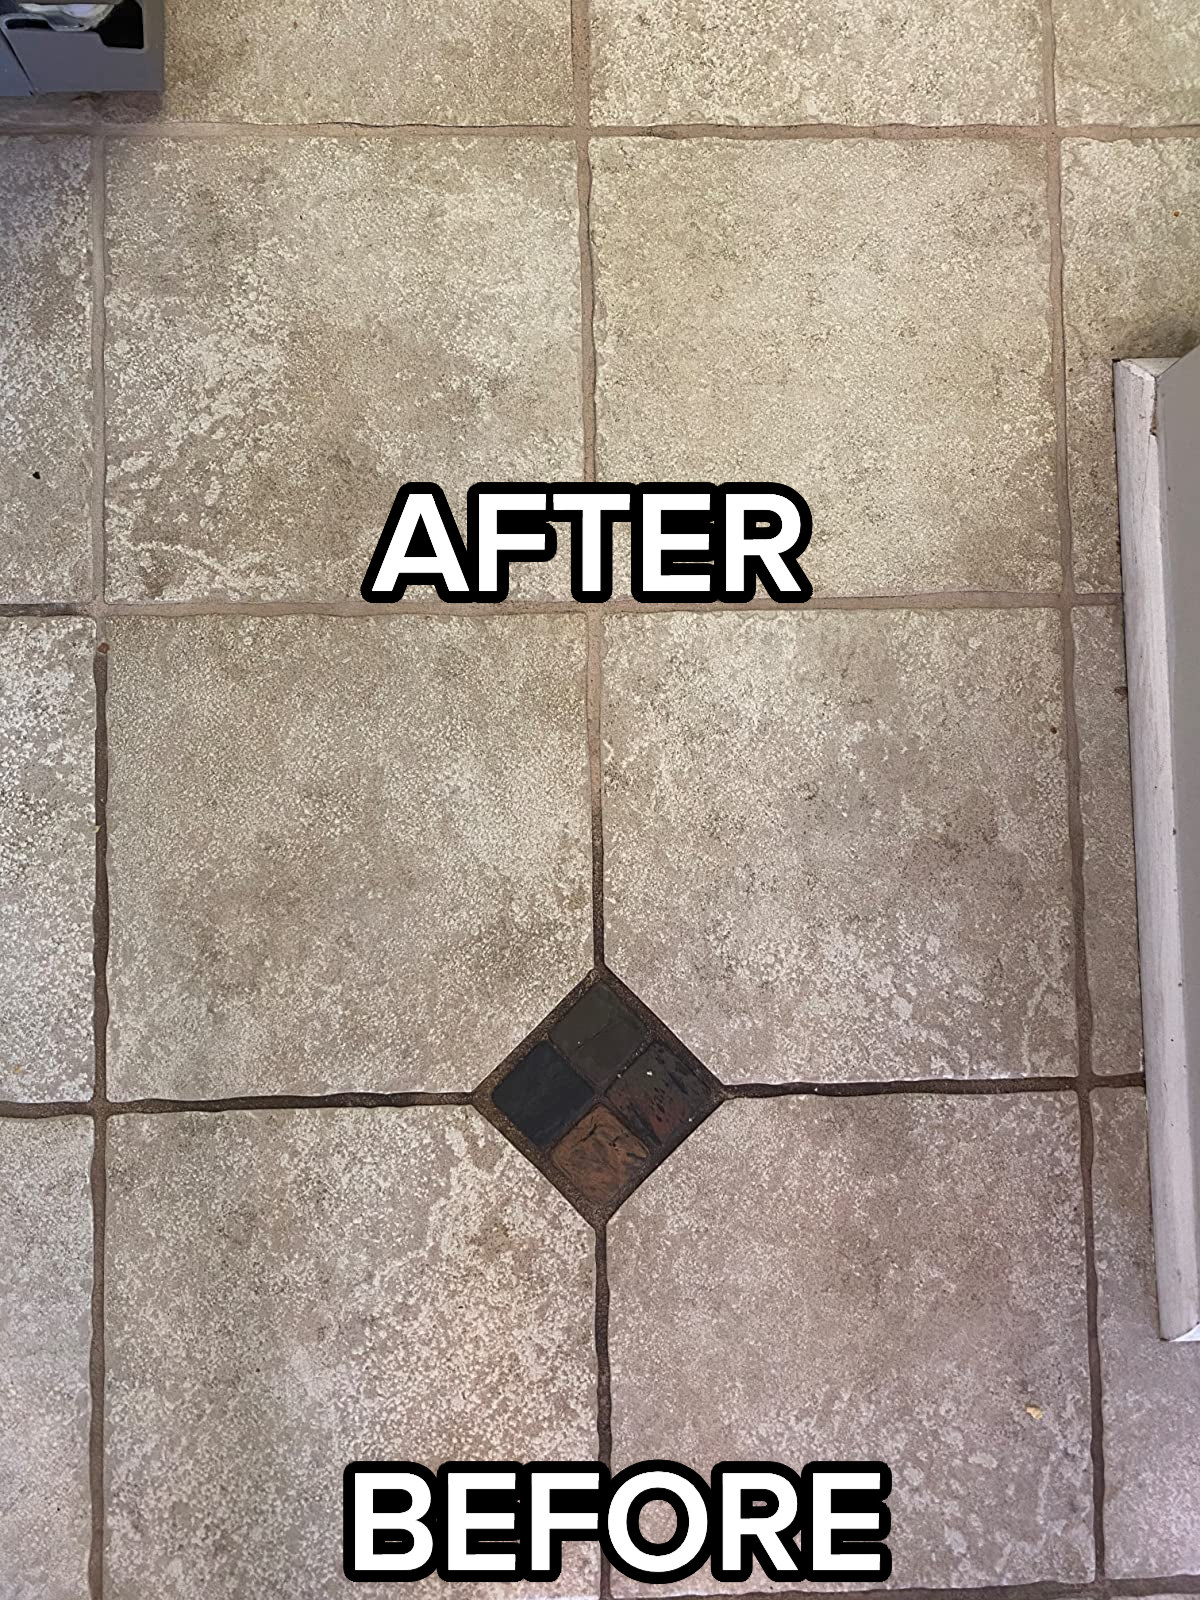 Tile & Grout Cleaning Business Startup Package - Magic Wand Company